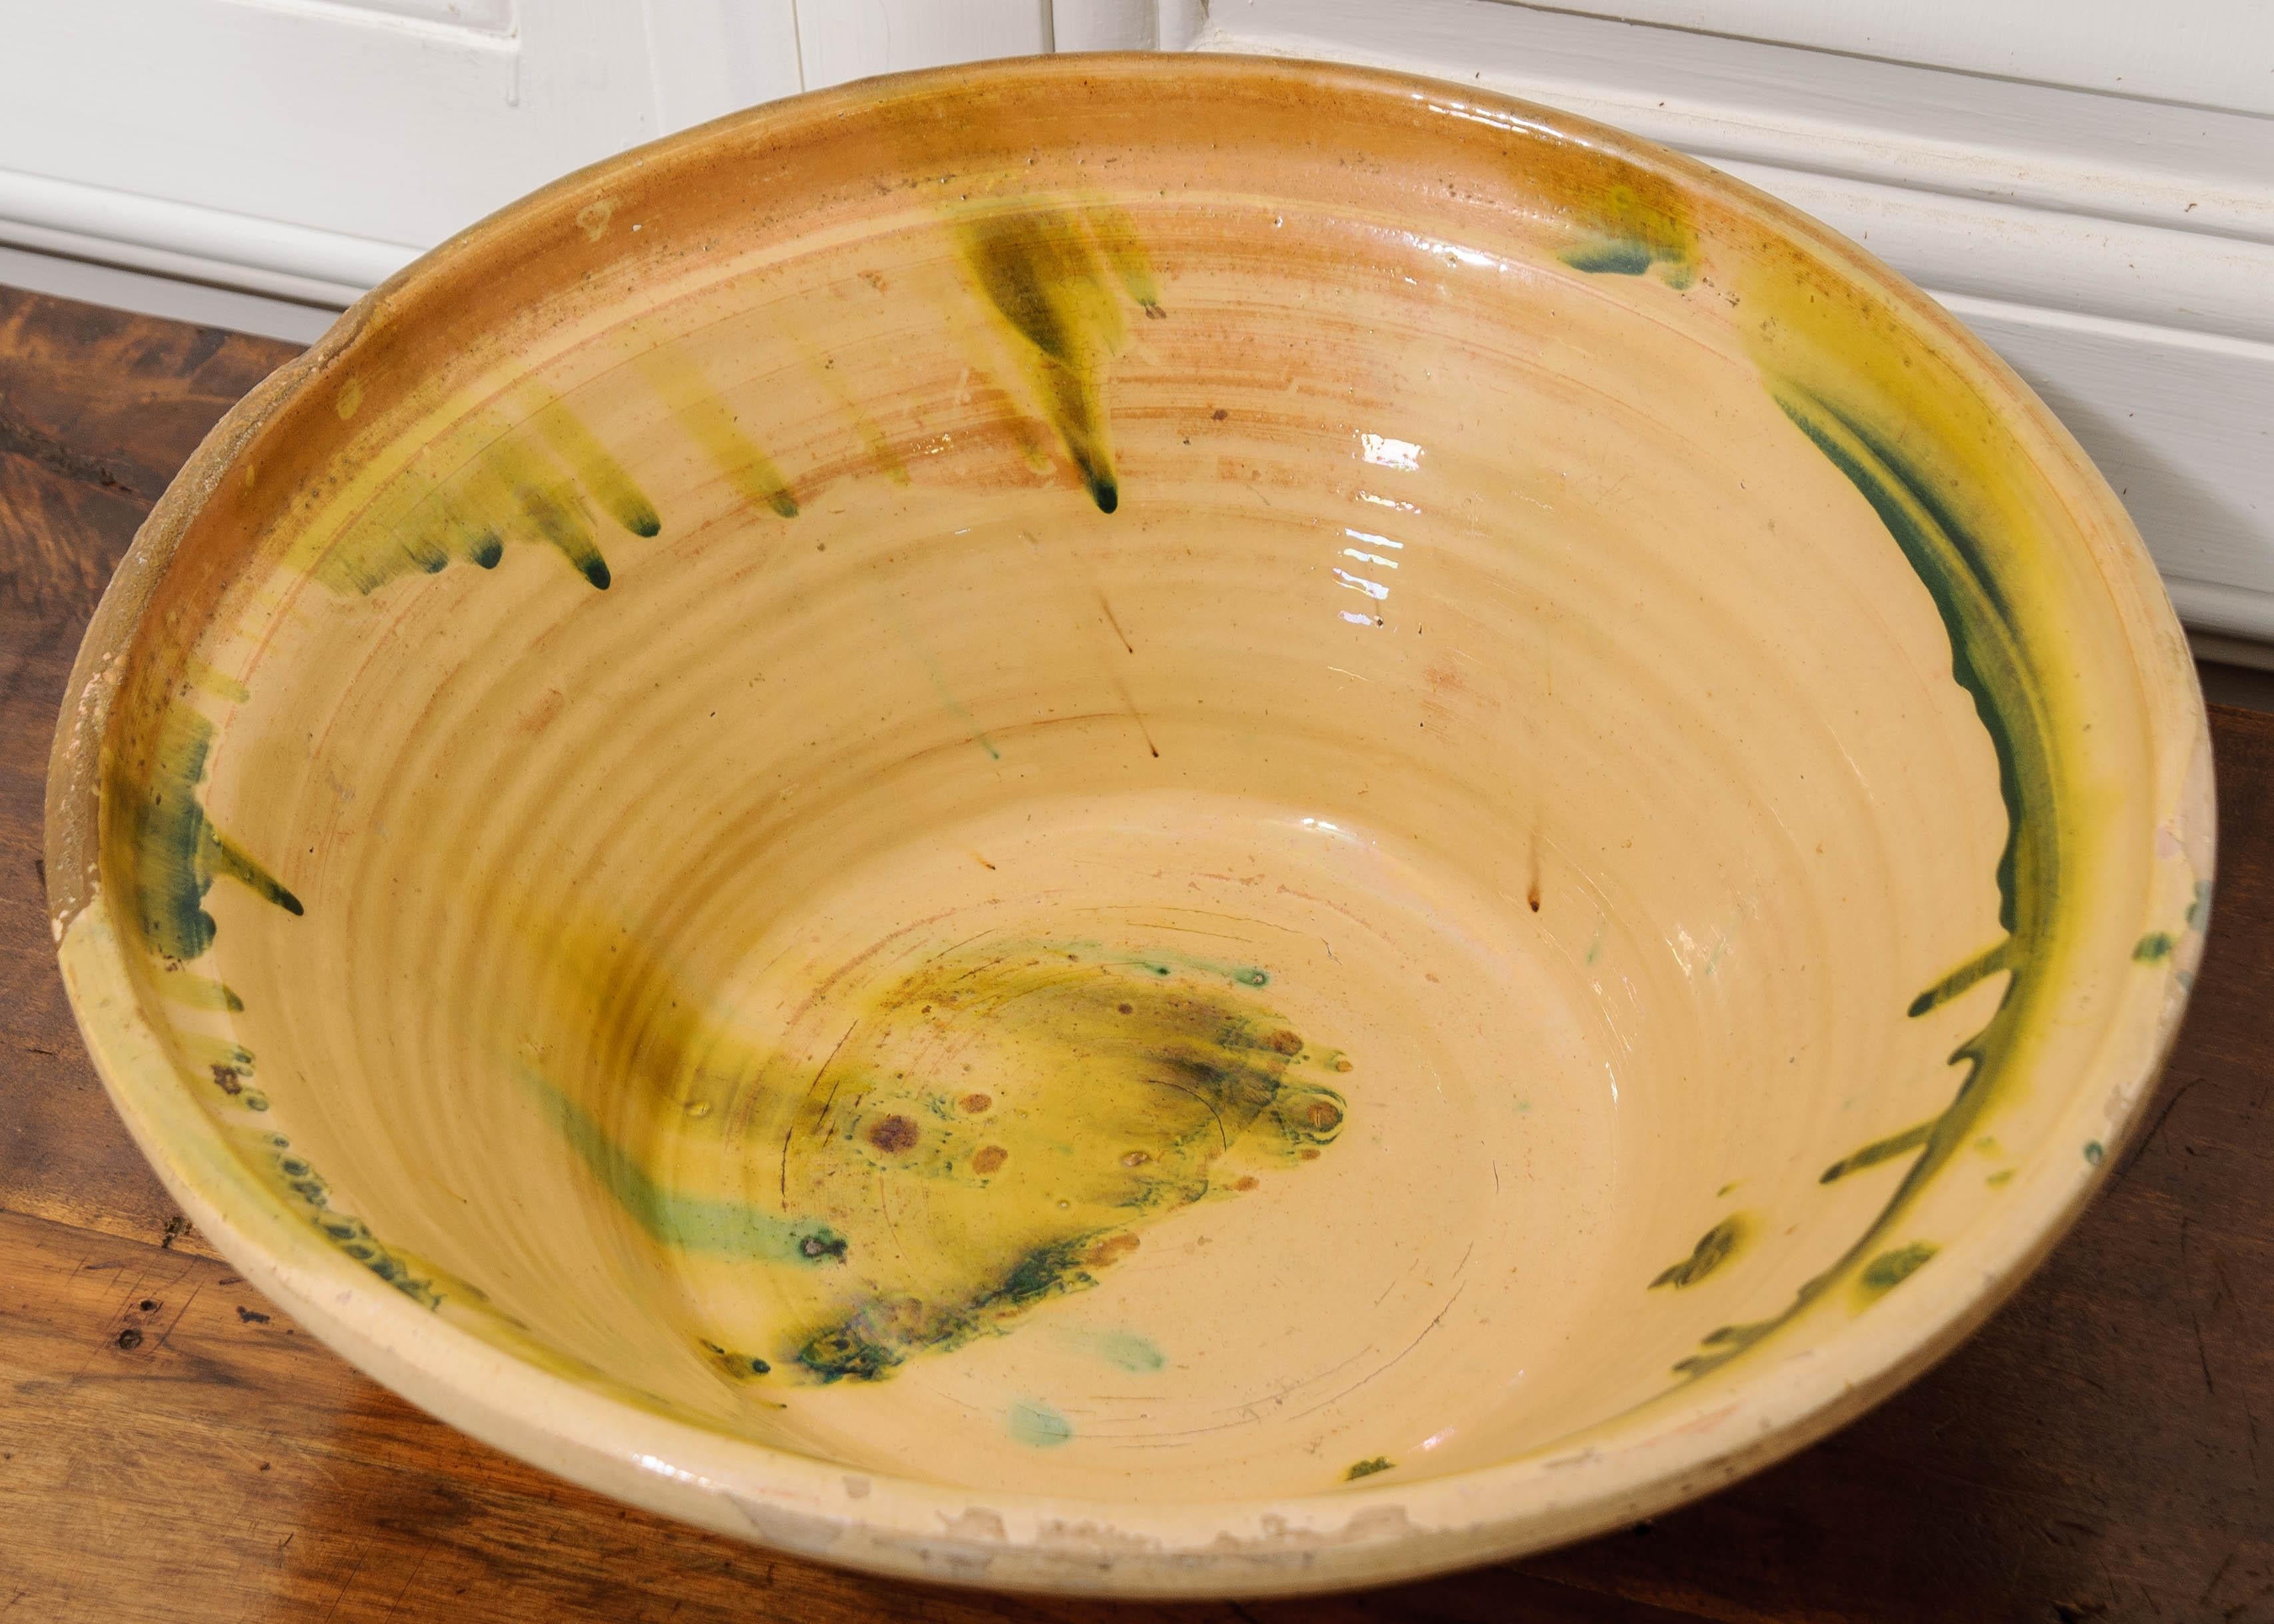 A fine mixing bowl made in 19th century, France. The bowl has been glazed with a rich, glossy yellow and green interior. This beautiful example of antique kitchenalia will make a wonderful centerpiece for your dining table, or perhaps a cachepot for